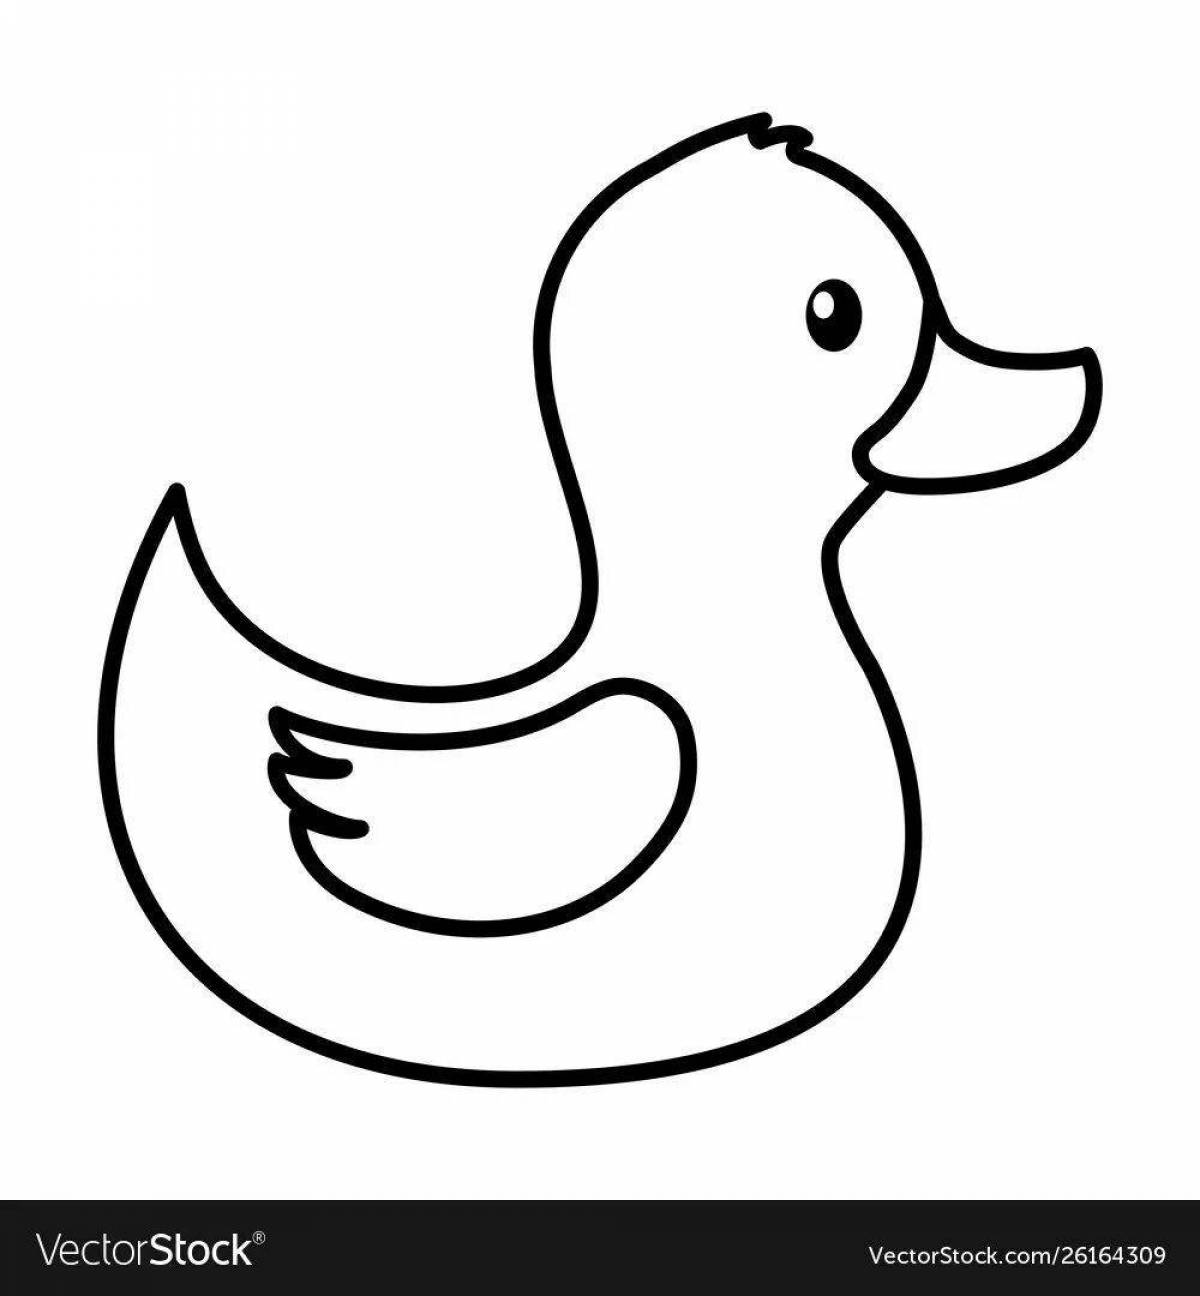 Brilliant Dymkovo duck, second youngest coloring page